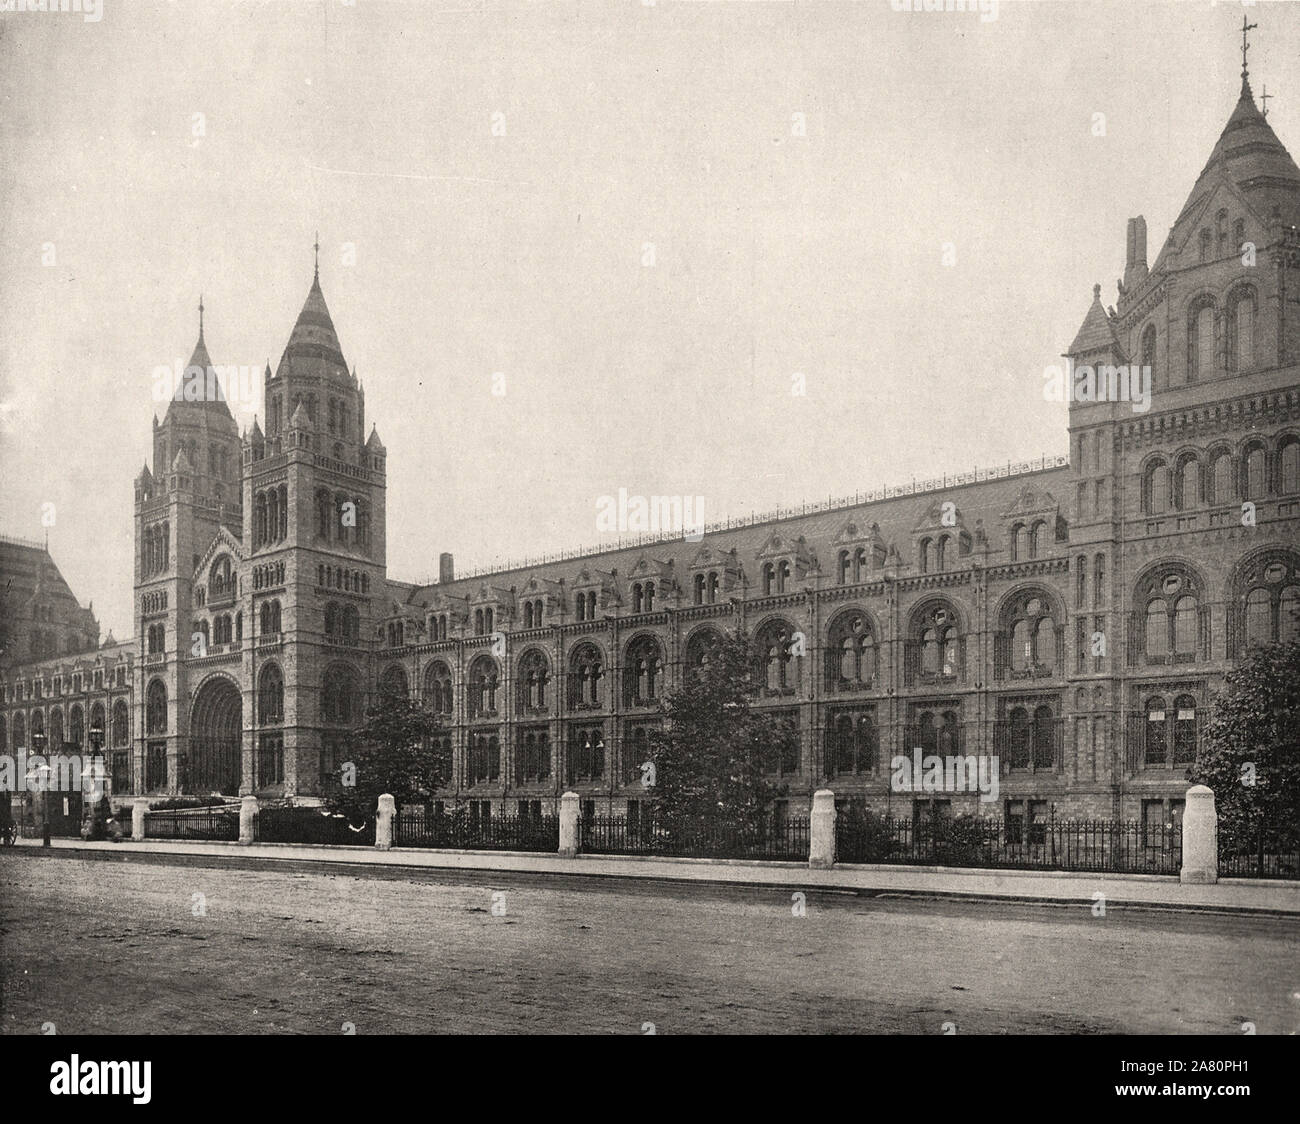 From 'The Descriptive Album of London' by George H Birch 1896 - Extracted text : ' THE NATURAL HISTORY MUSEUM.—This building is situated in South Kensington, to the South of the Imperial Institute. It was erected in 1873—80, after designs by Mr. Alfred Waterhouse, R. A. The facade is 675 feet in length. It contains the Natural History Collections of the British Museum, and comprises Geological, logical, Ornithological, Mineralogical, Mammalian, Botanical and Osteological collections of great • interest. In the Mineralogical department, in case I g, is the Colenso Diamond, the gift of Mr. Ruski Stock Photo